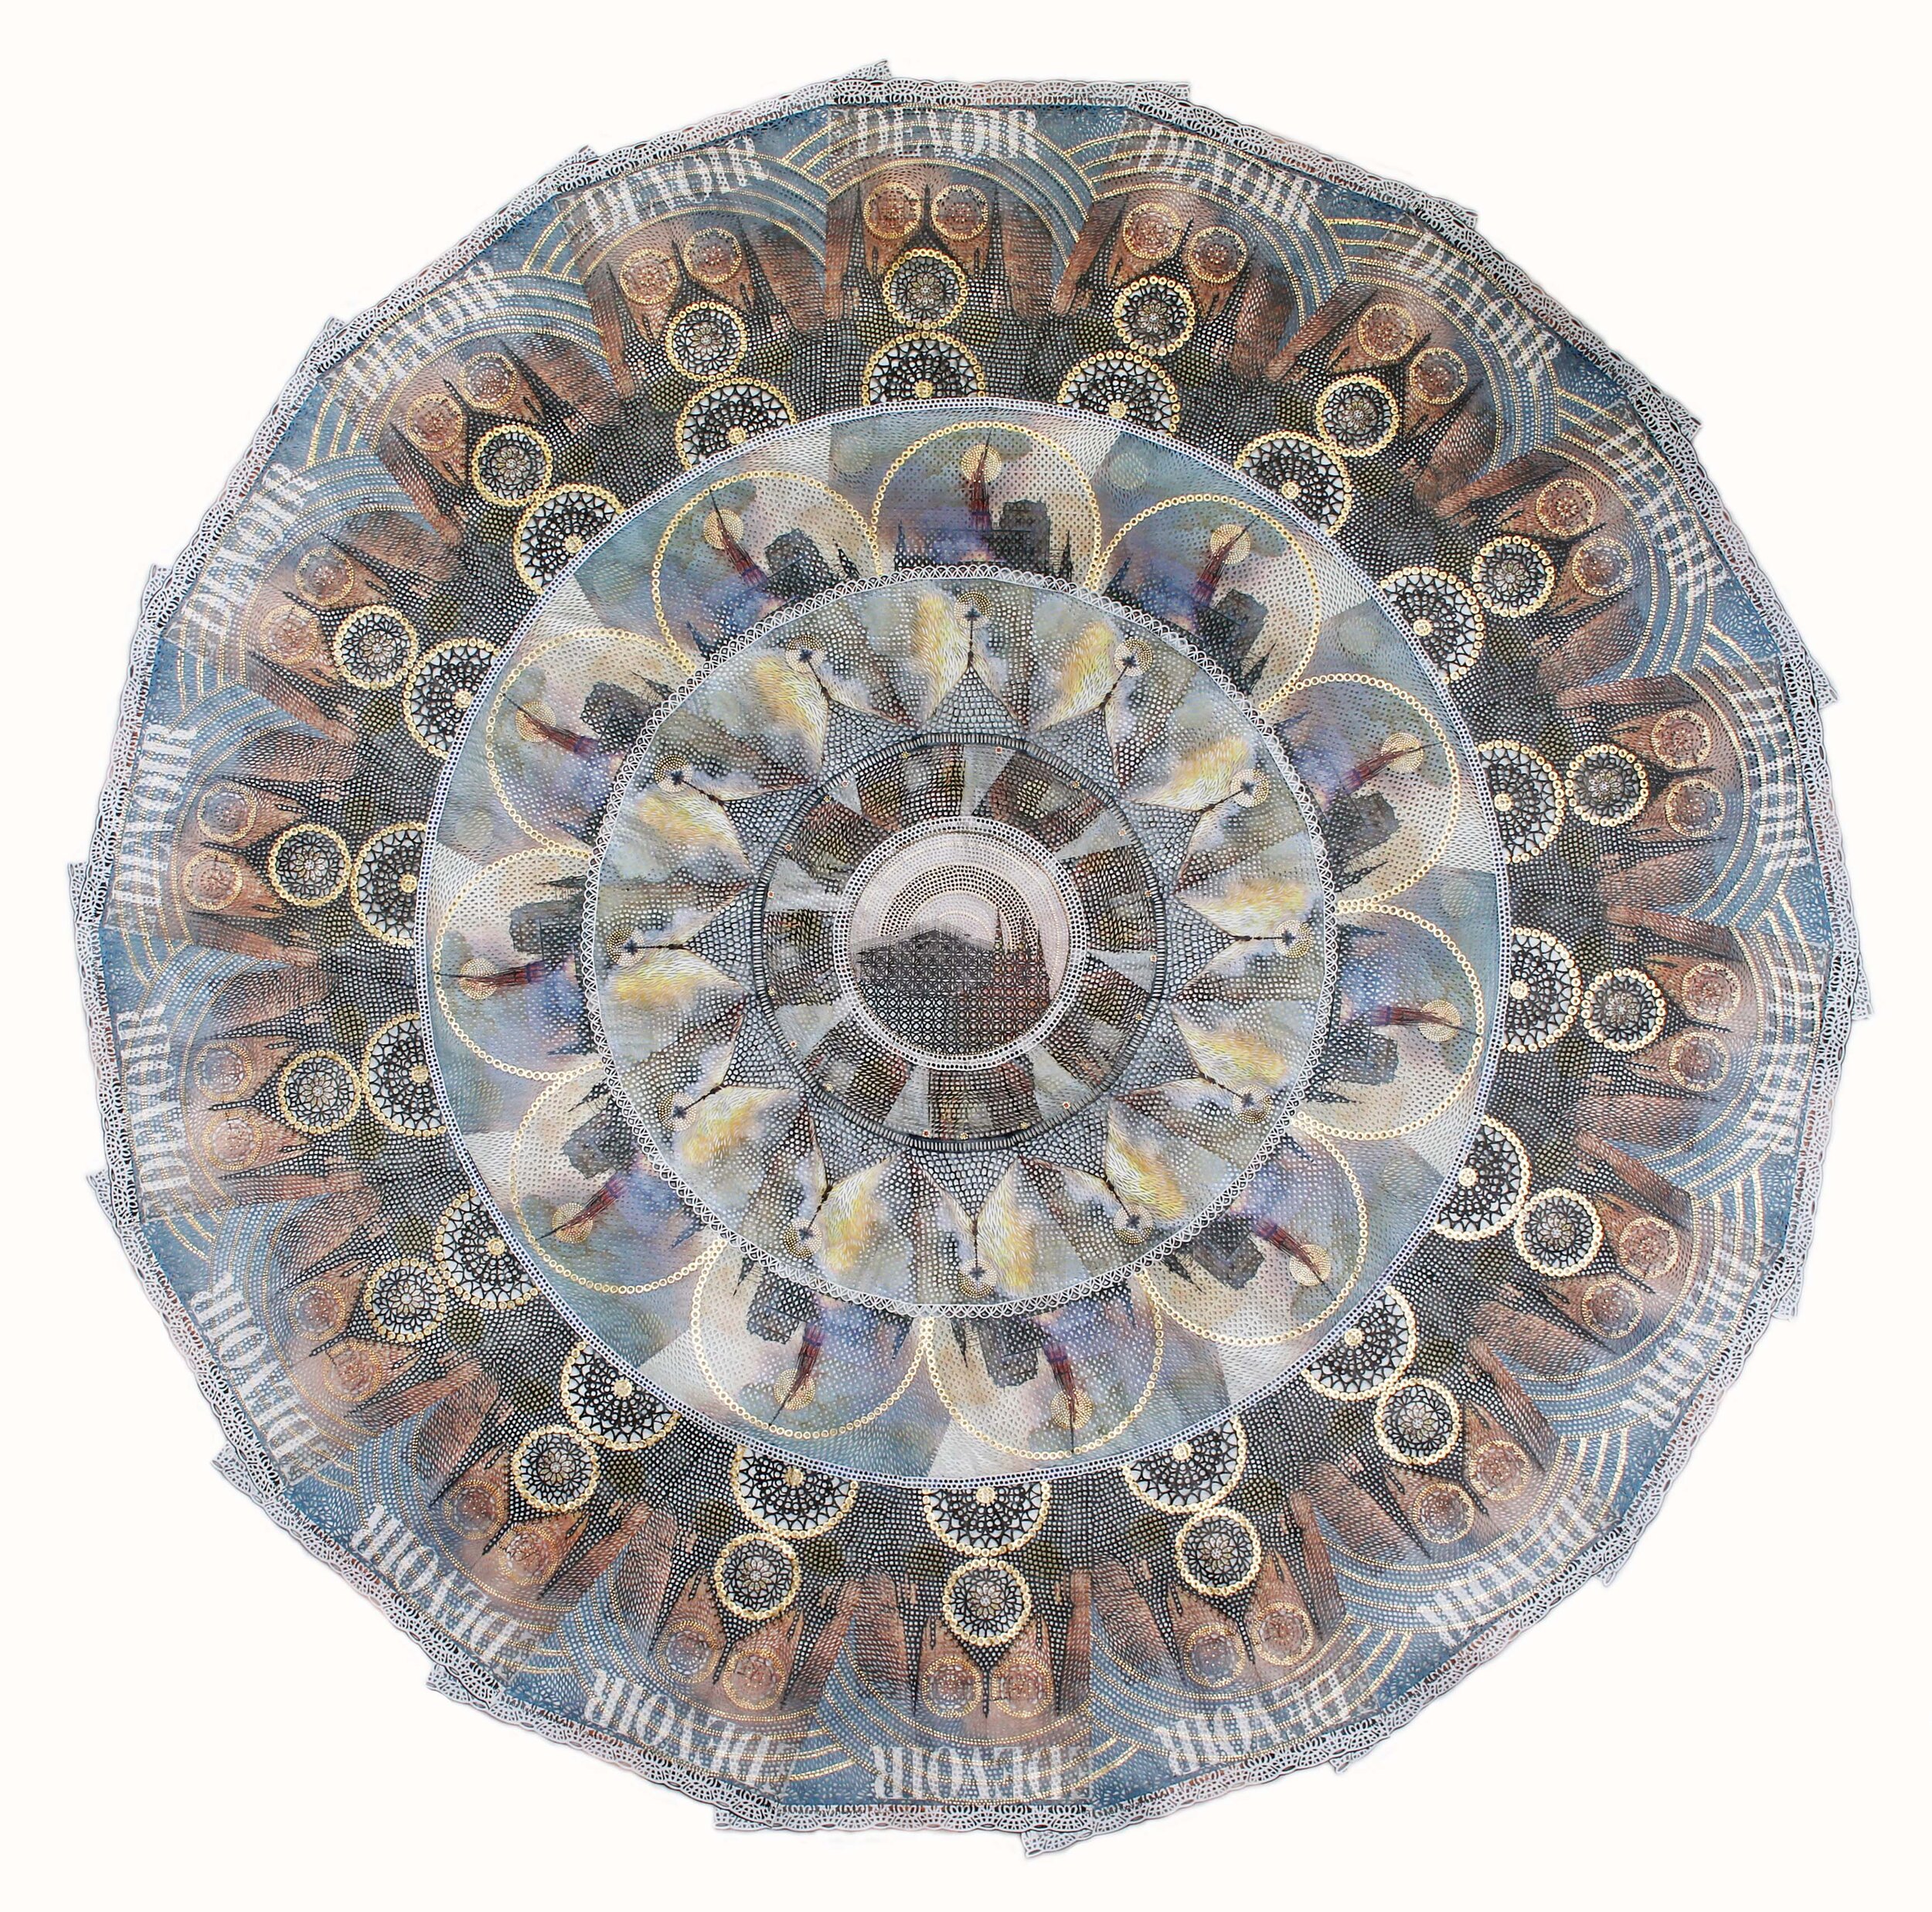 Notre Dame Cathedral, Tuesday April 16, 2019, collage of newspaper and japanese paper cut-outs (x-acto), gold leaf, 52” diameter